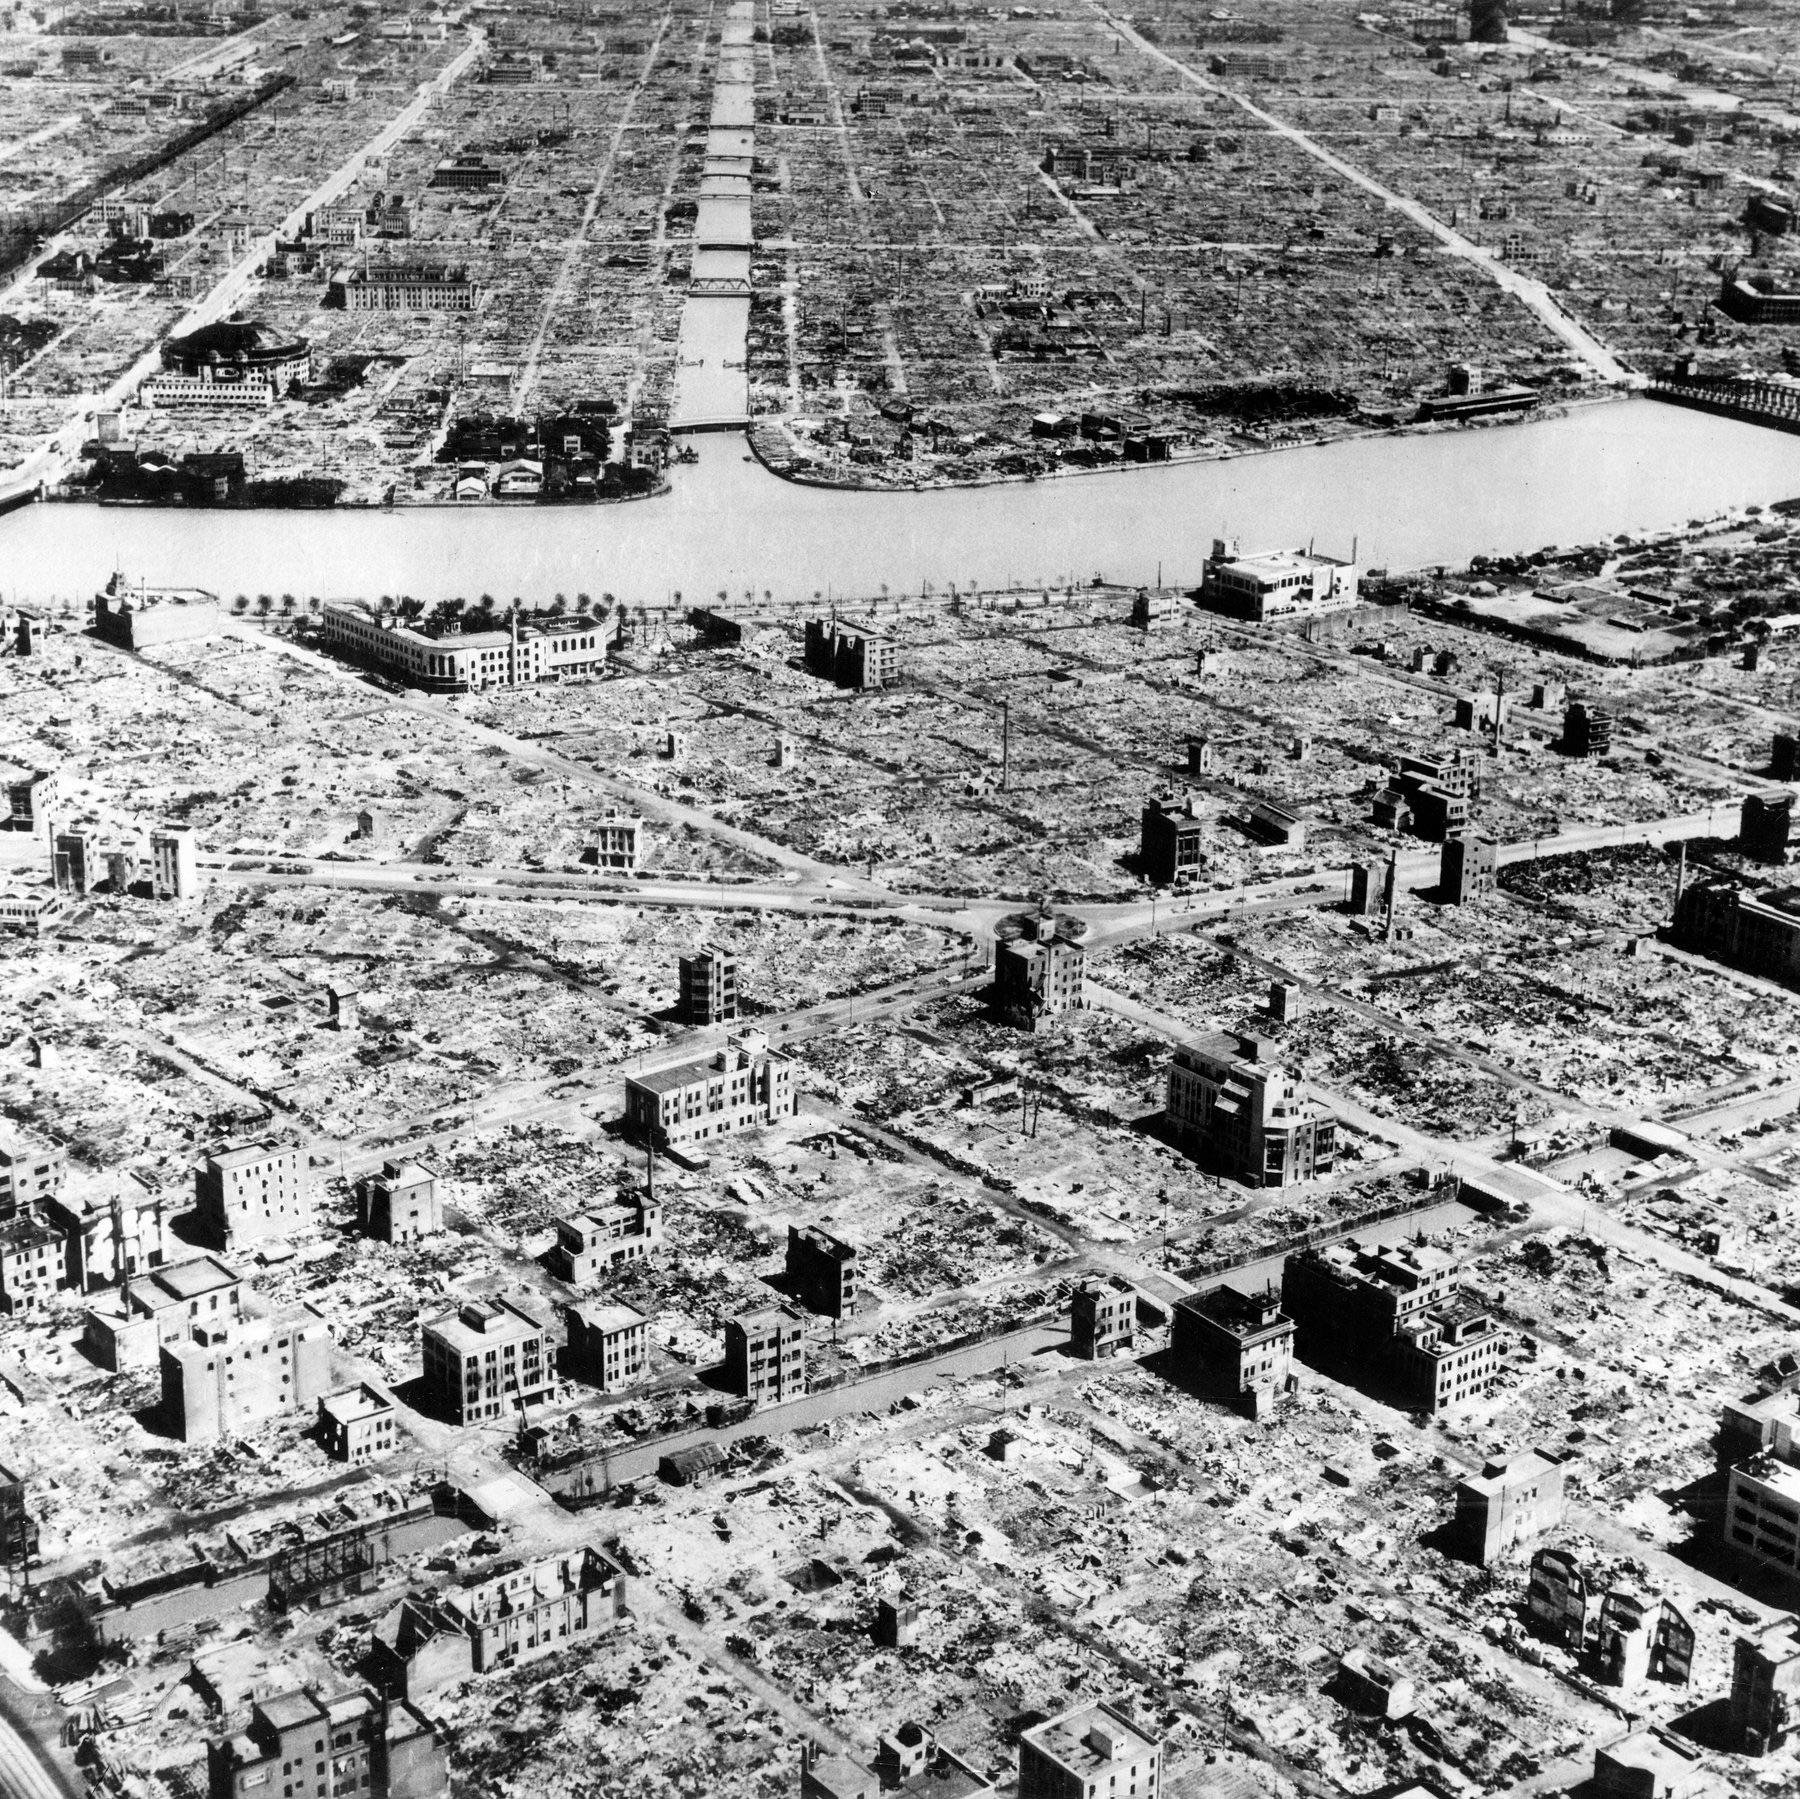 the darker side of life - On the night of March 9-10 1945 in Tokyo, Operation Meetinghouse was conducted by the United States. The fire bombing raid killed at least 100,000 civilians and left over 1 million homeless. It is considered the most destructive 